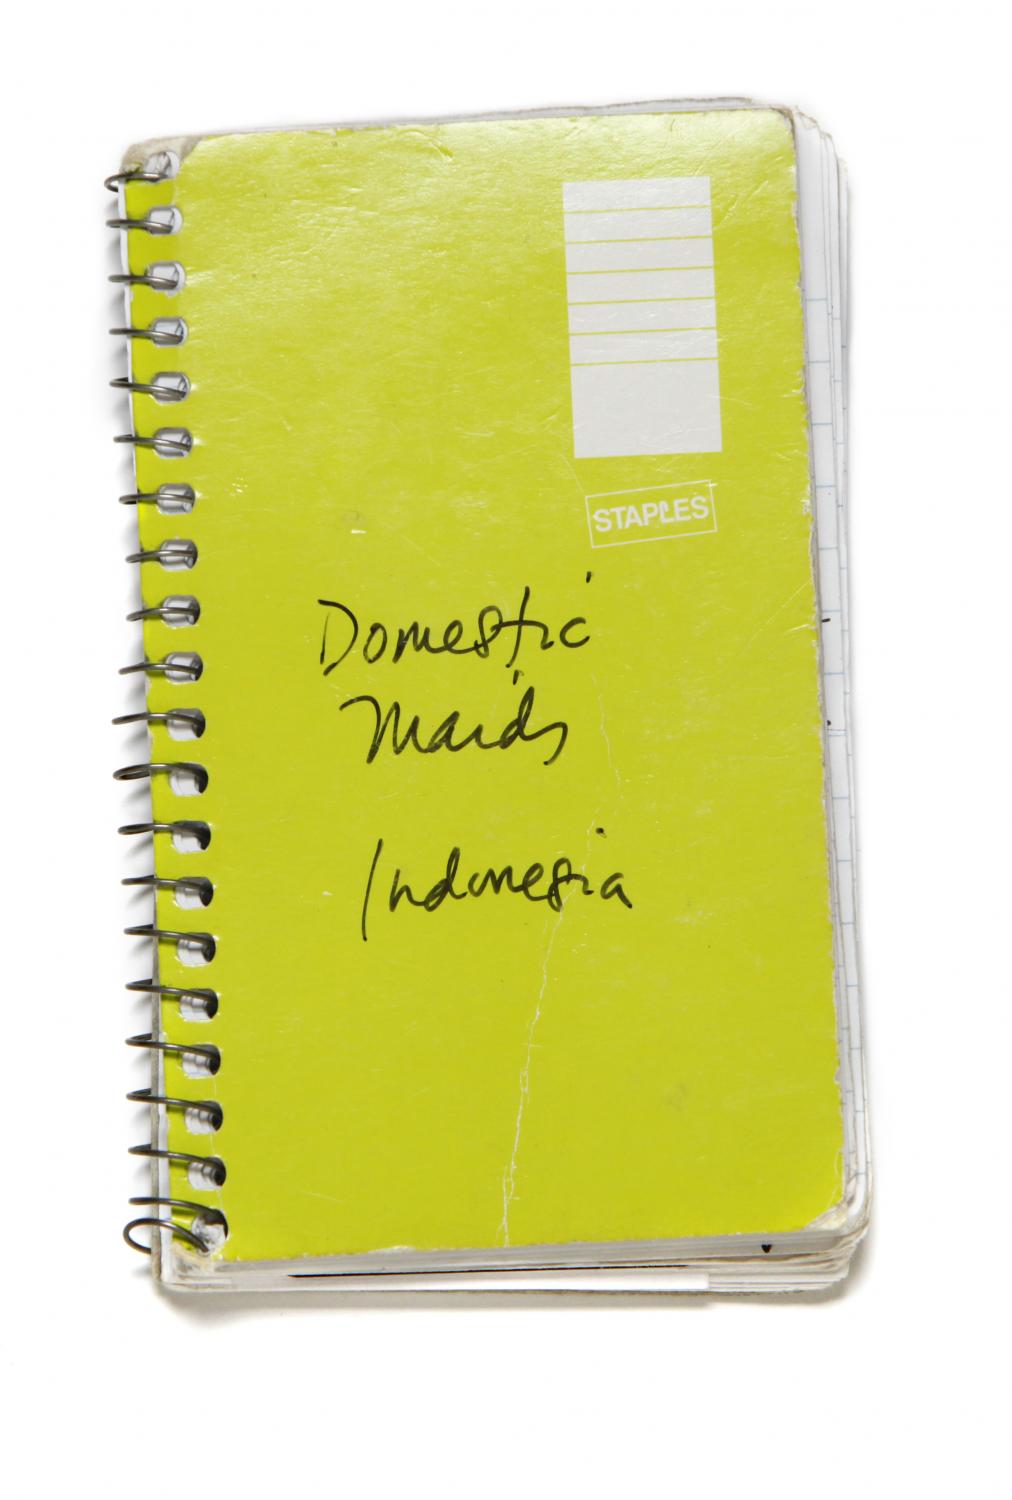 Domestic Maids, Indonesia (2006) - Notebook, 2006.